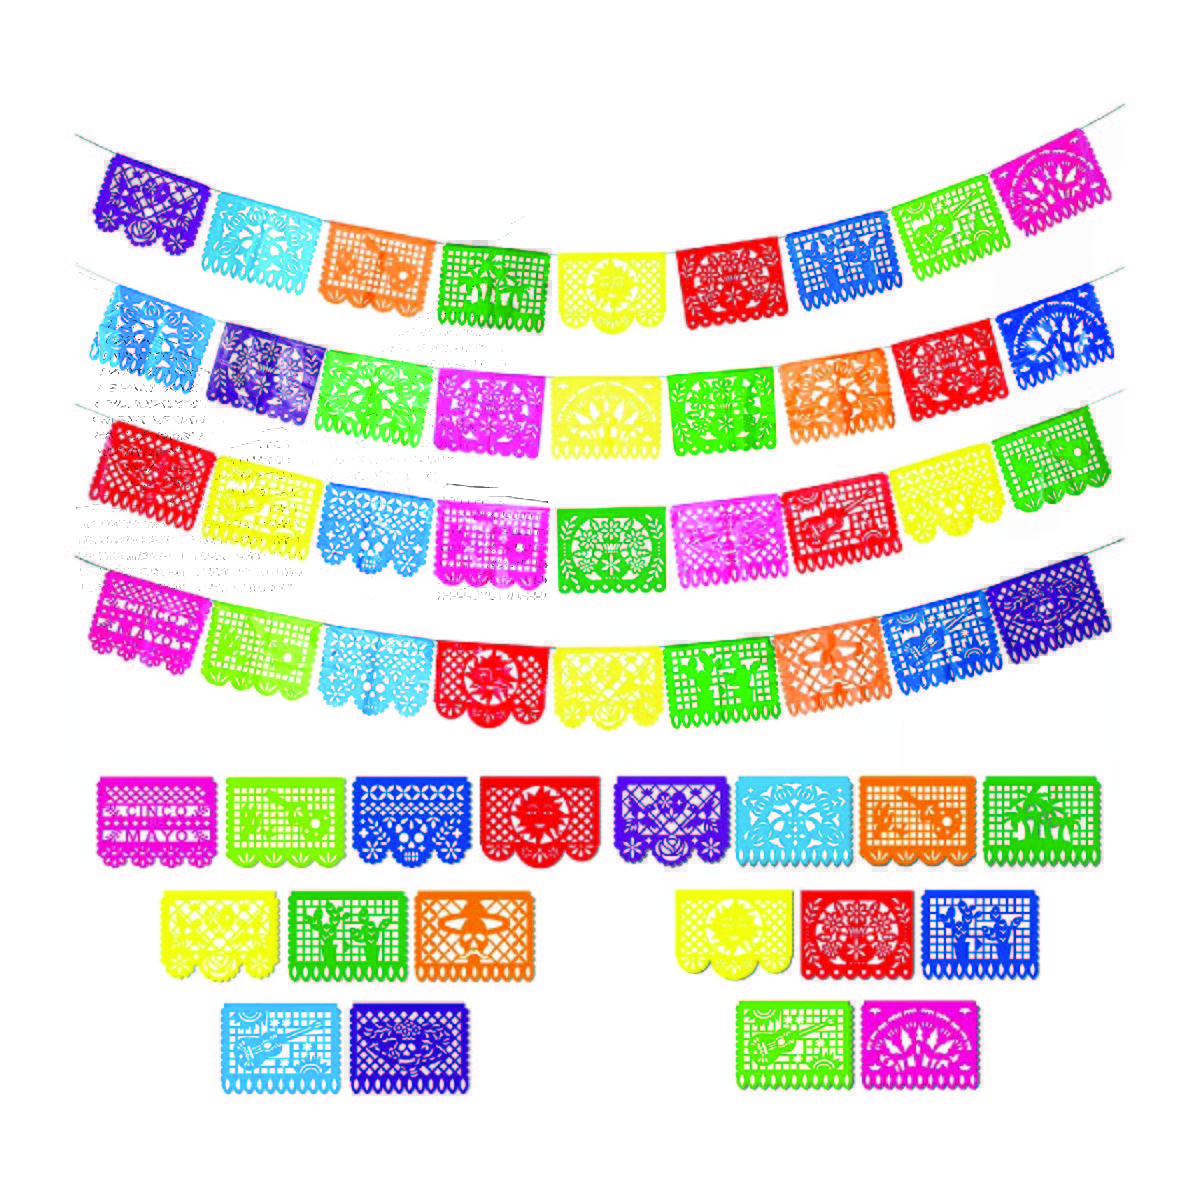 Bright banners consisting of multiple small different-colored flags with different Mexican-themed designs.